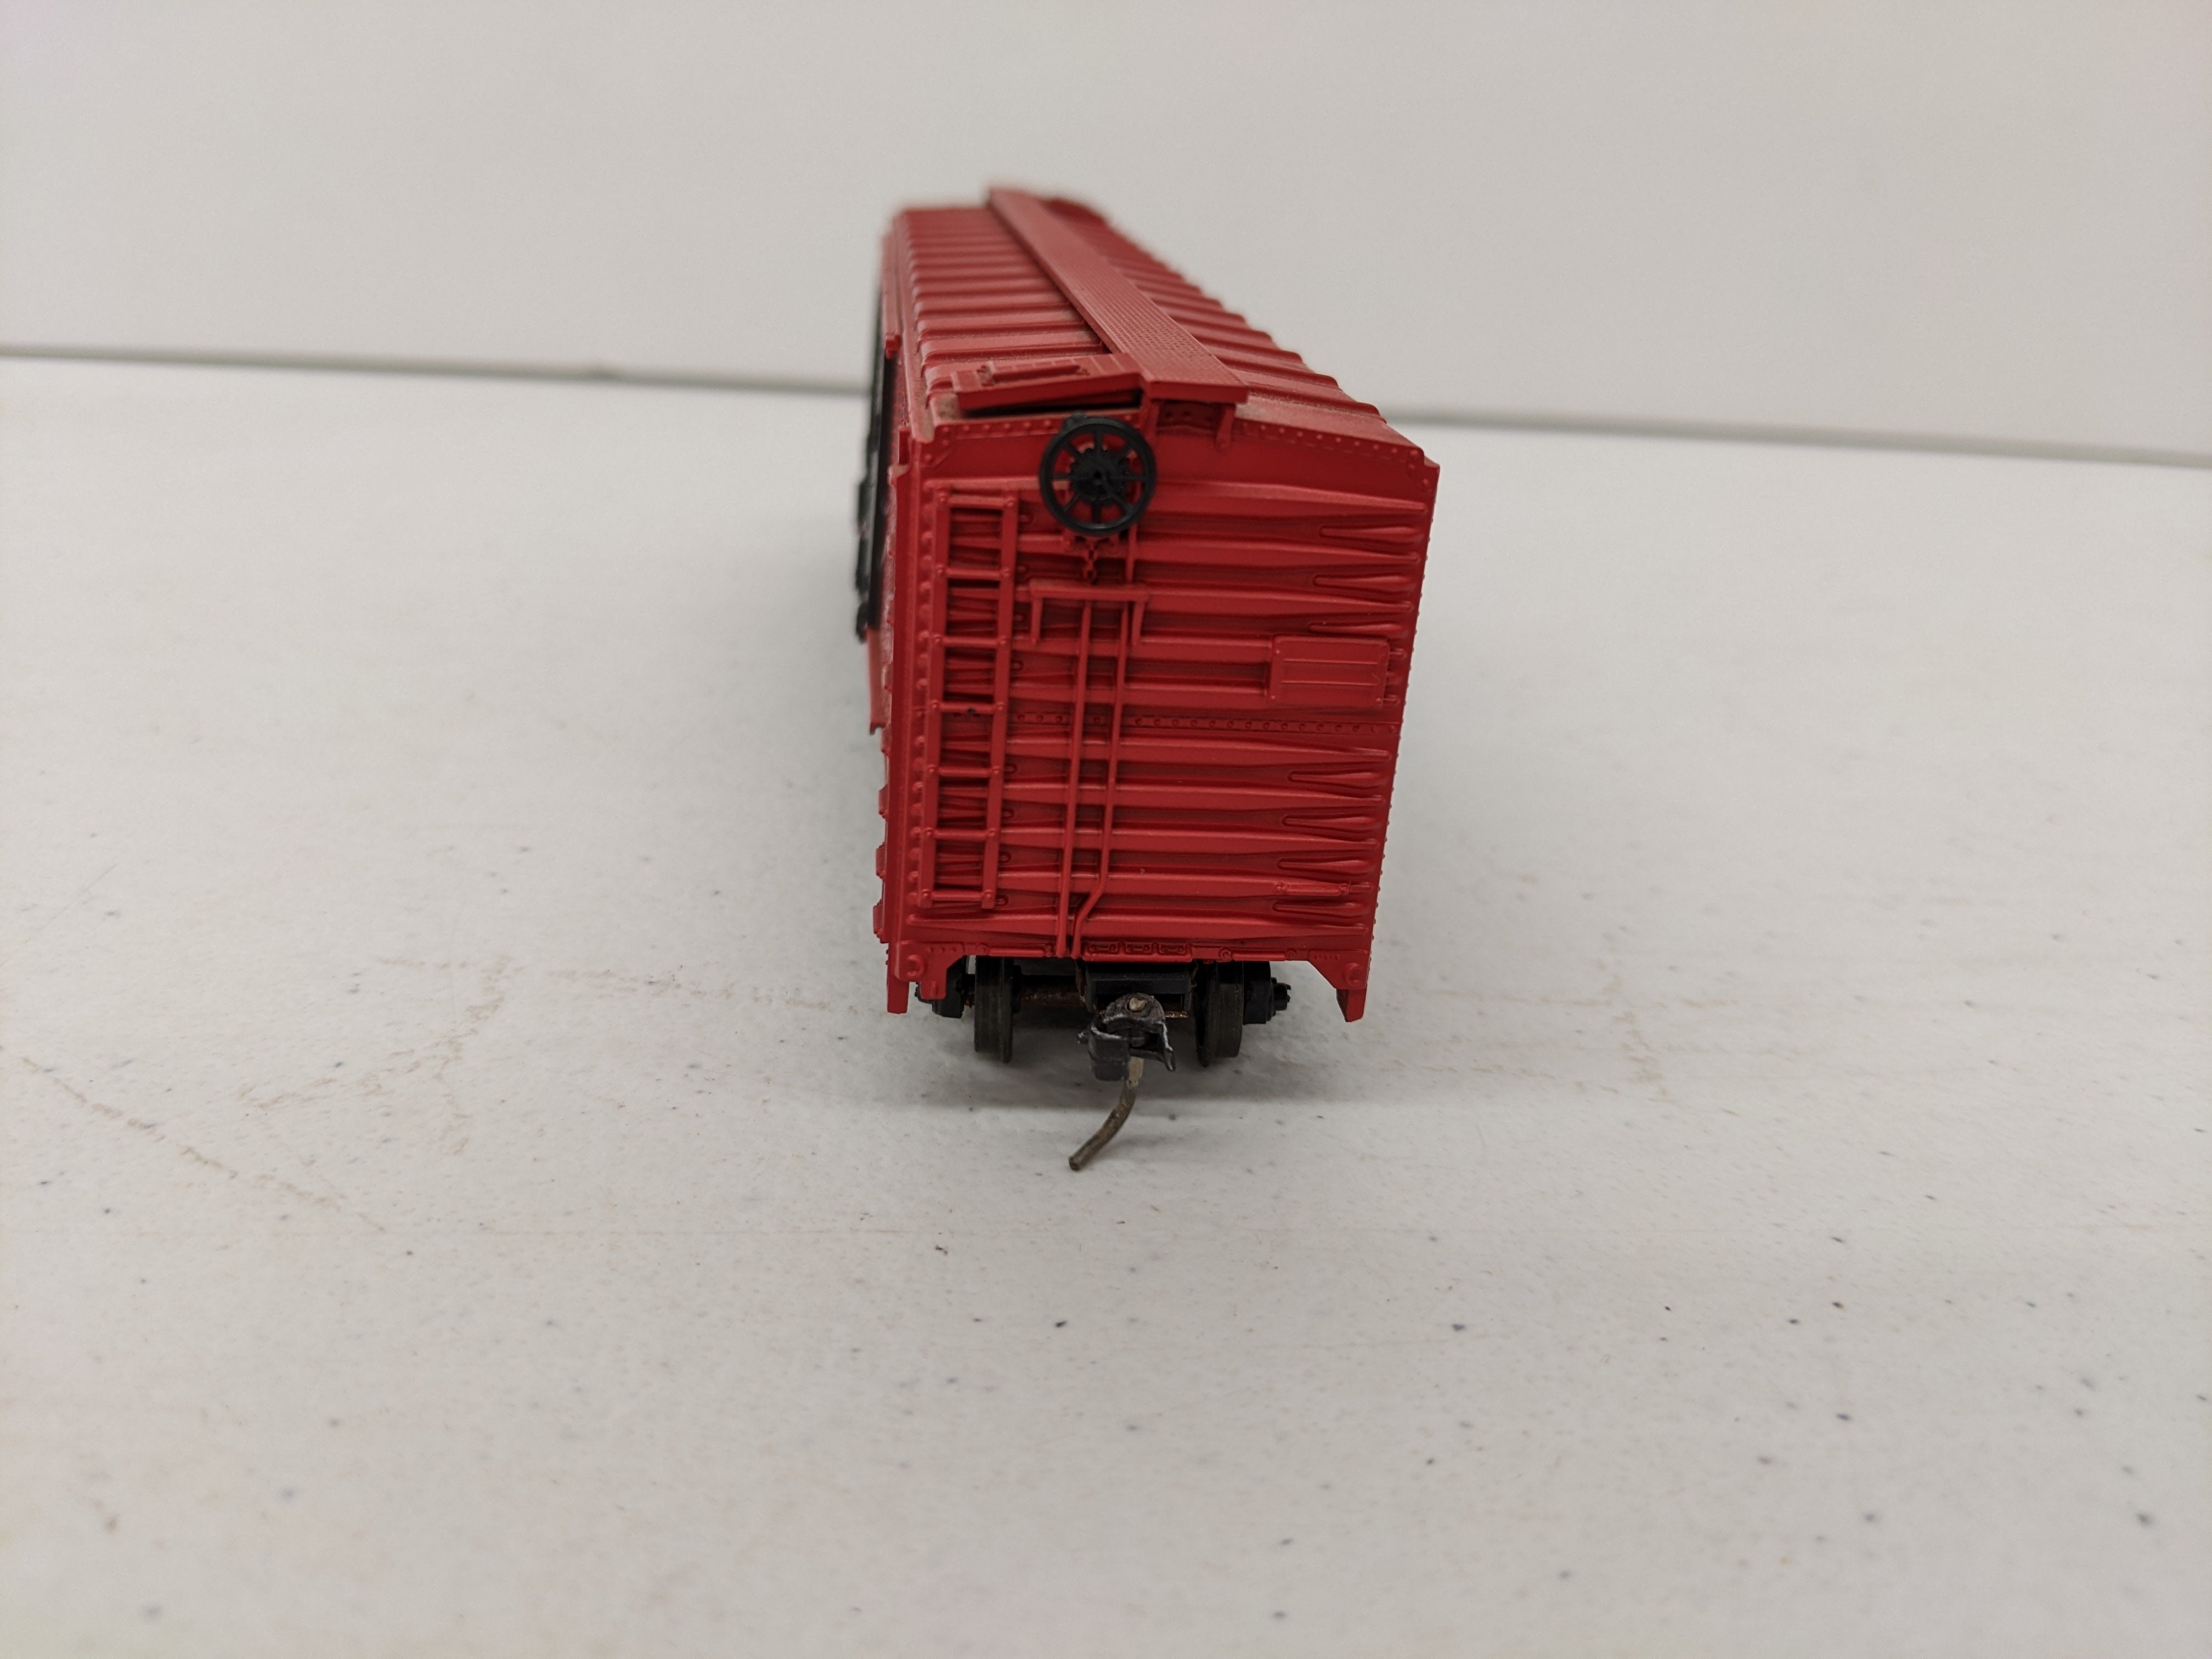 USED Athearn HO Scale, 50' Double Door Box Car, Great Northern GN #3525